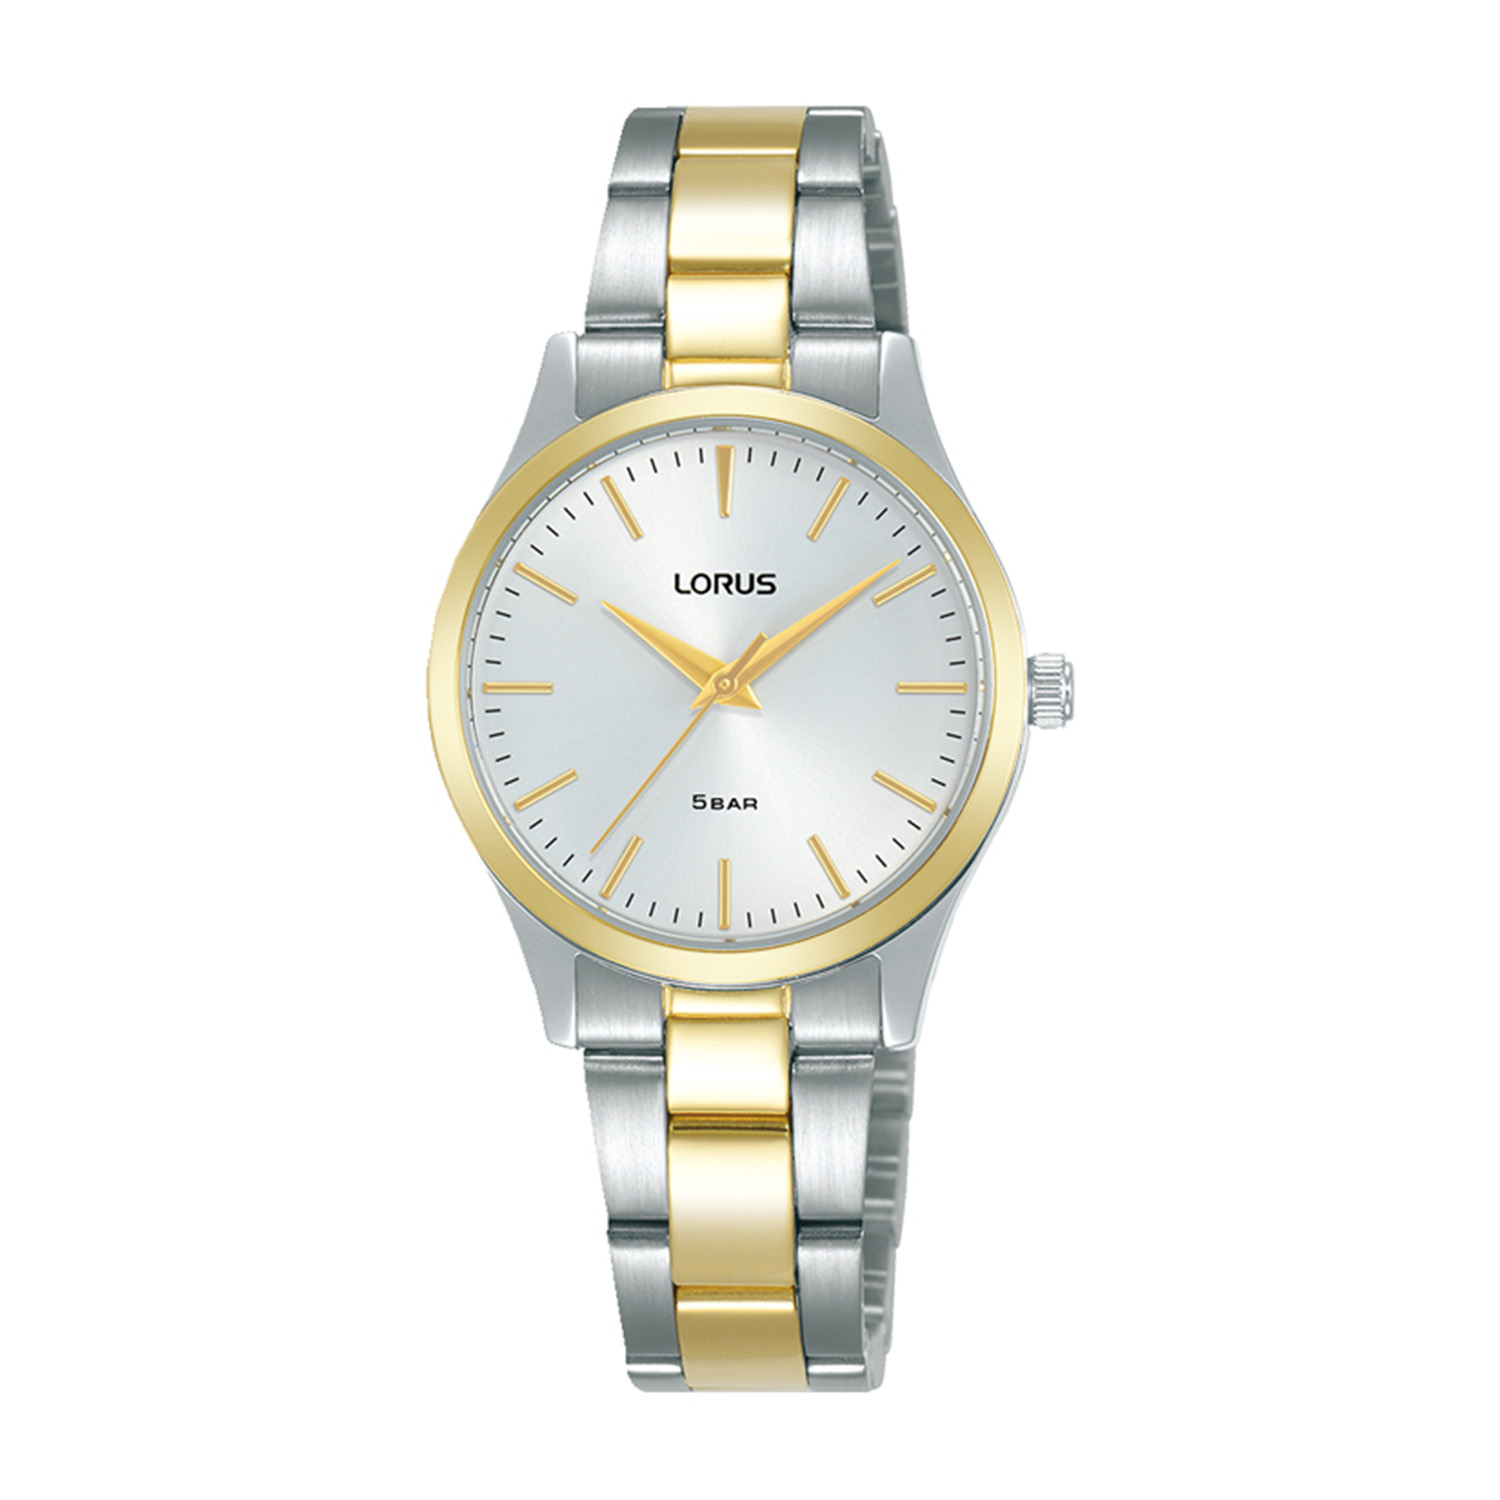 Womens watch LORUS made of two-tone stainless steel with white dial and bracelet.